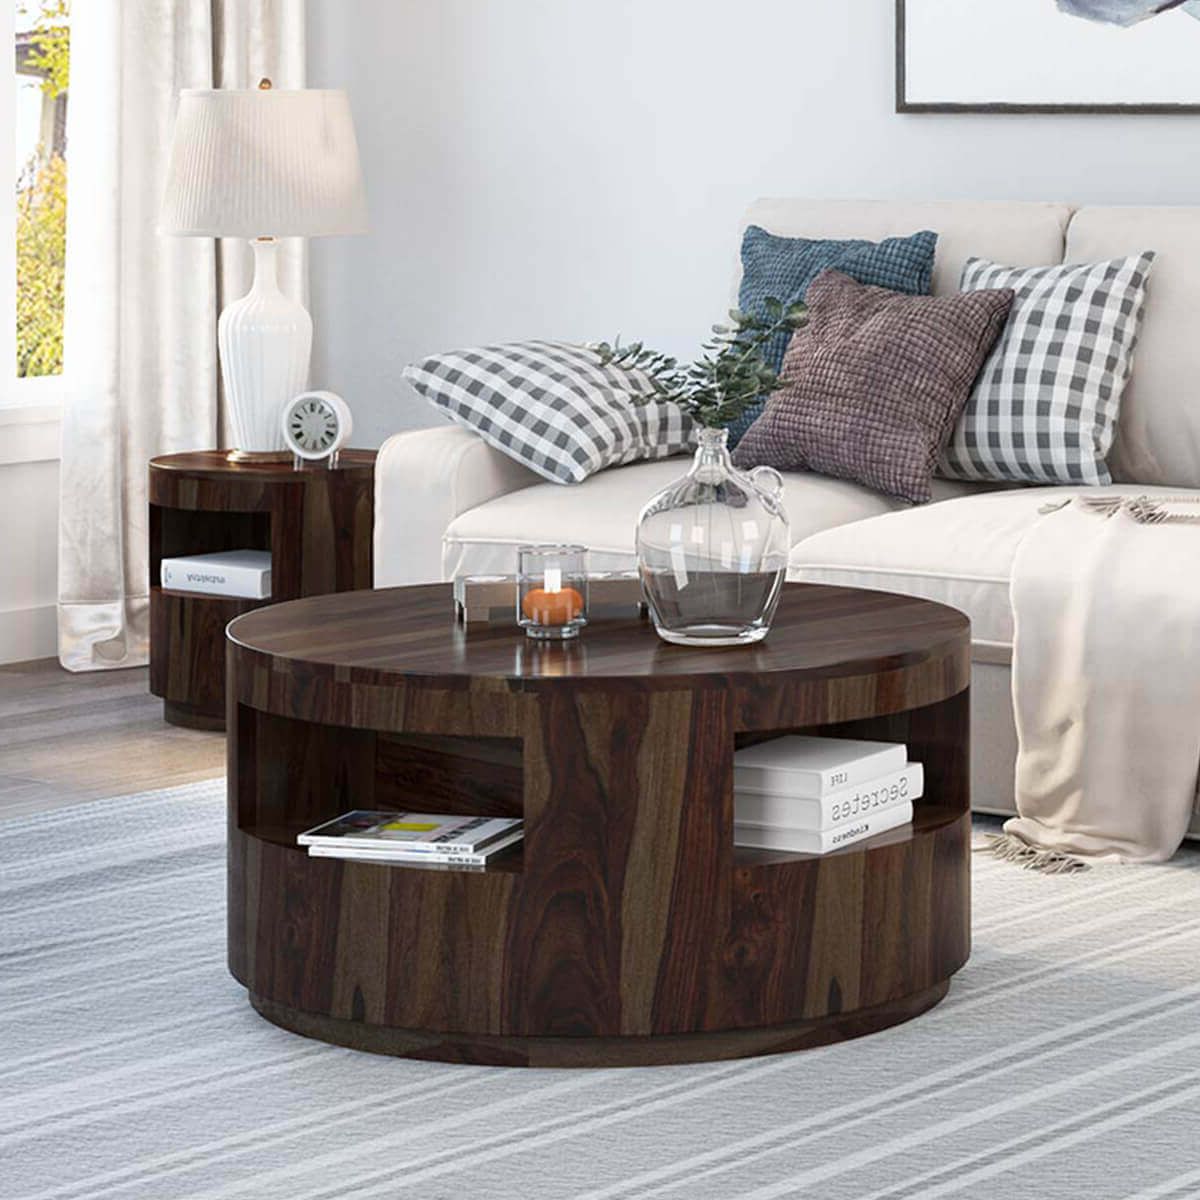 2020 Rustic Round Coffee Tables In Ladonia Rustic Solid Wood Round Coffee Table (View 4 of 20)